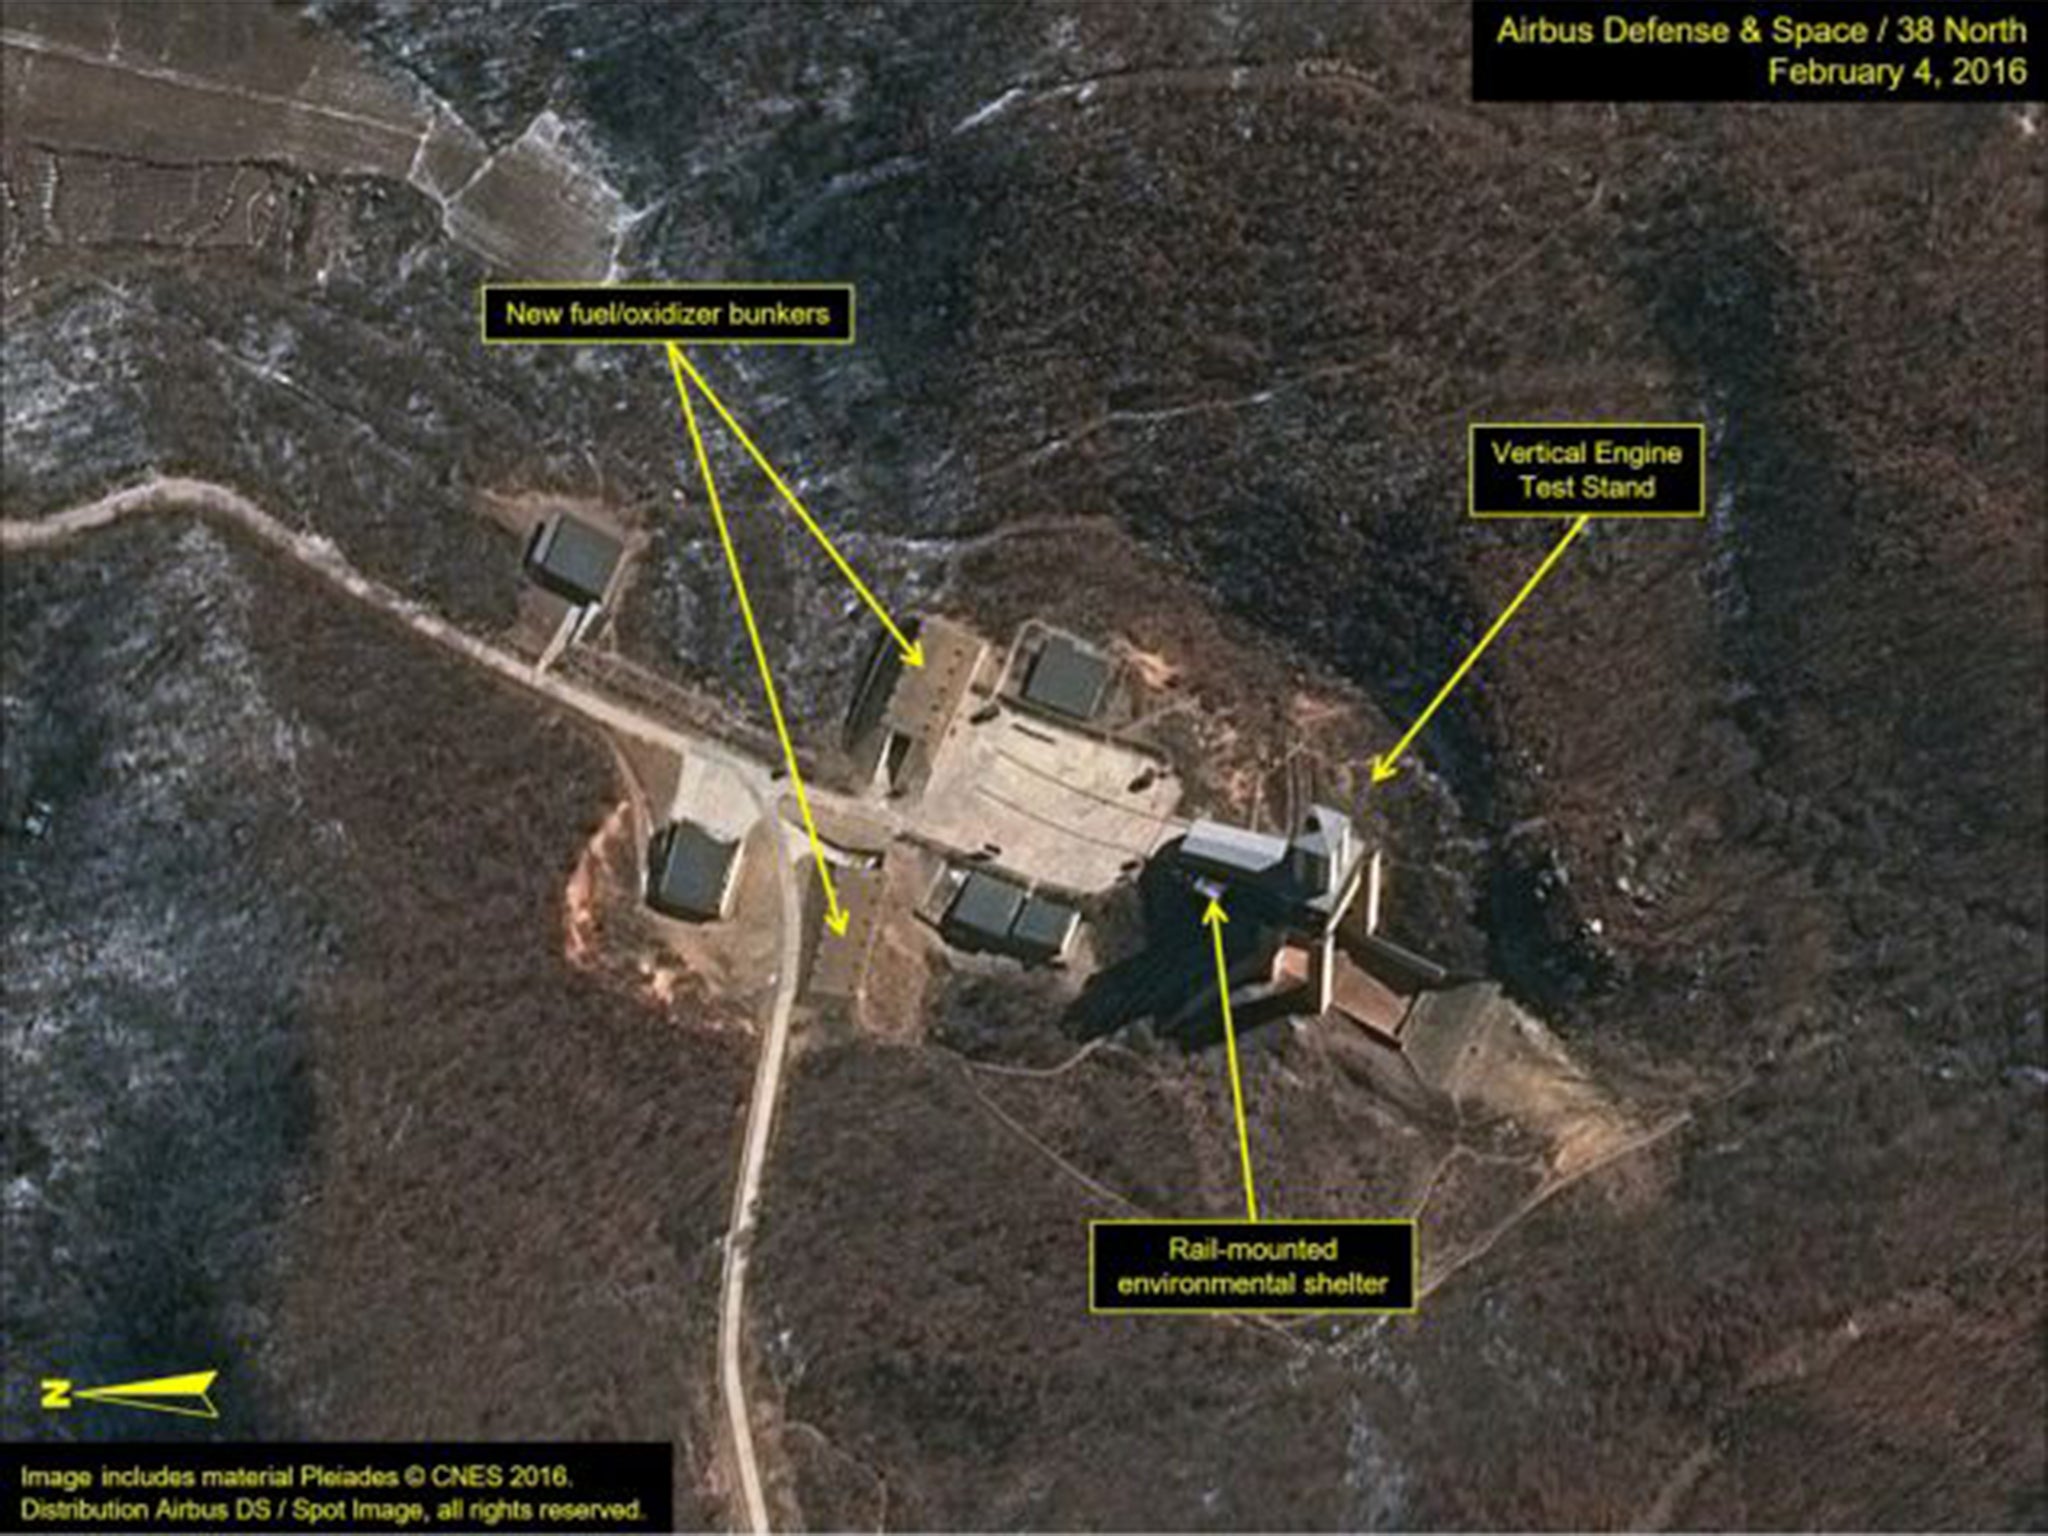 Airbus Defense & Space and 38 North satellite imagery shows the Sohae Satellite Launching Station in North Korea